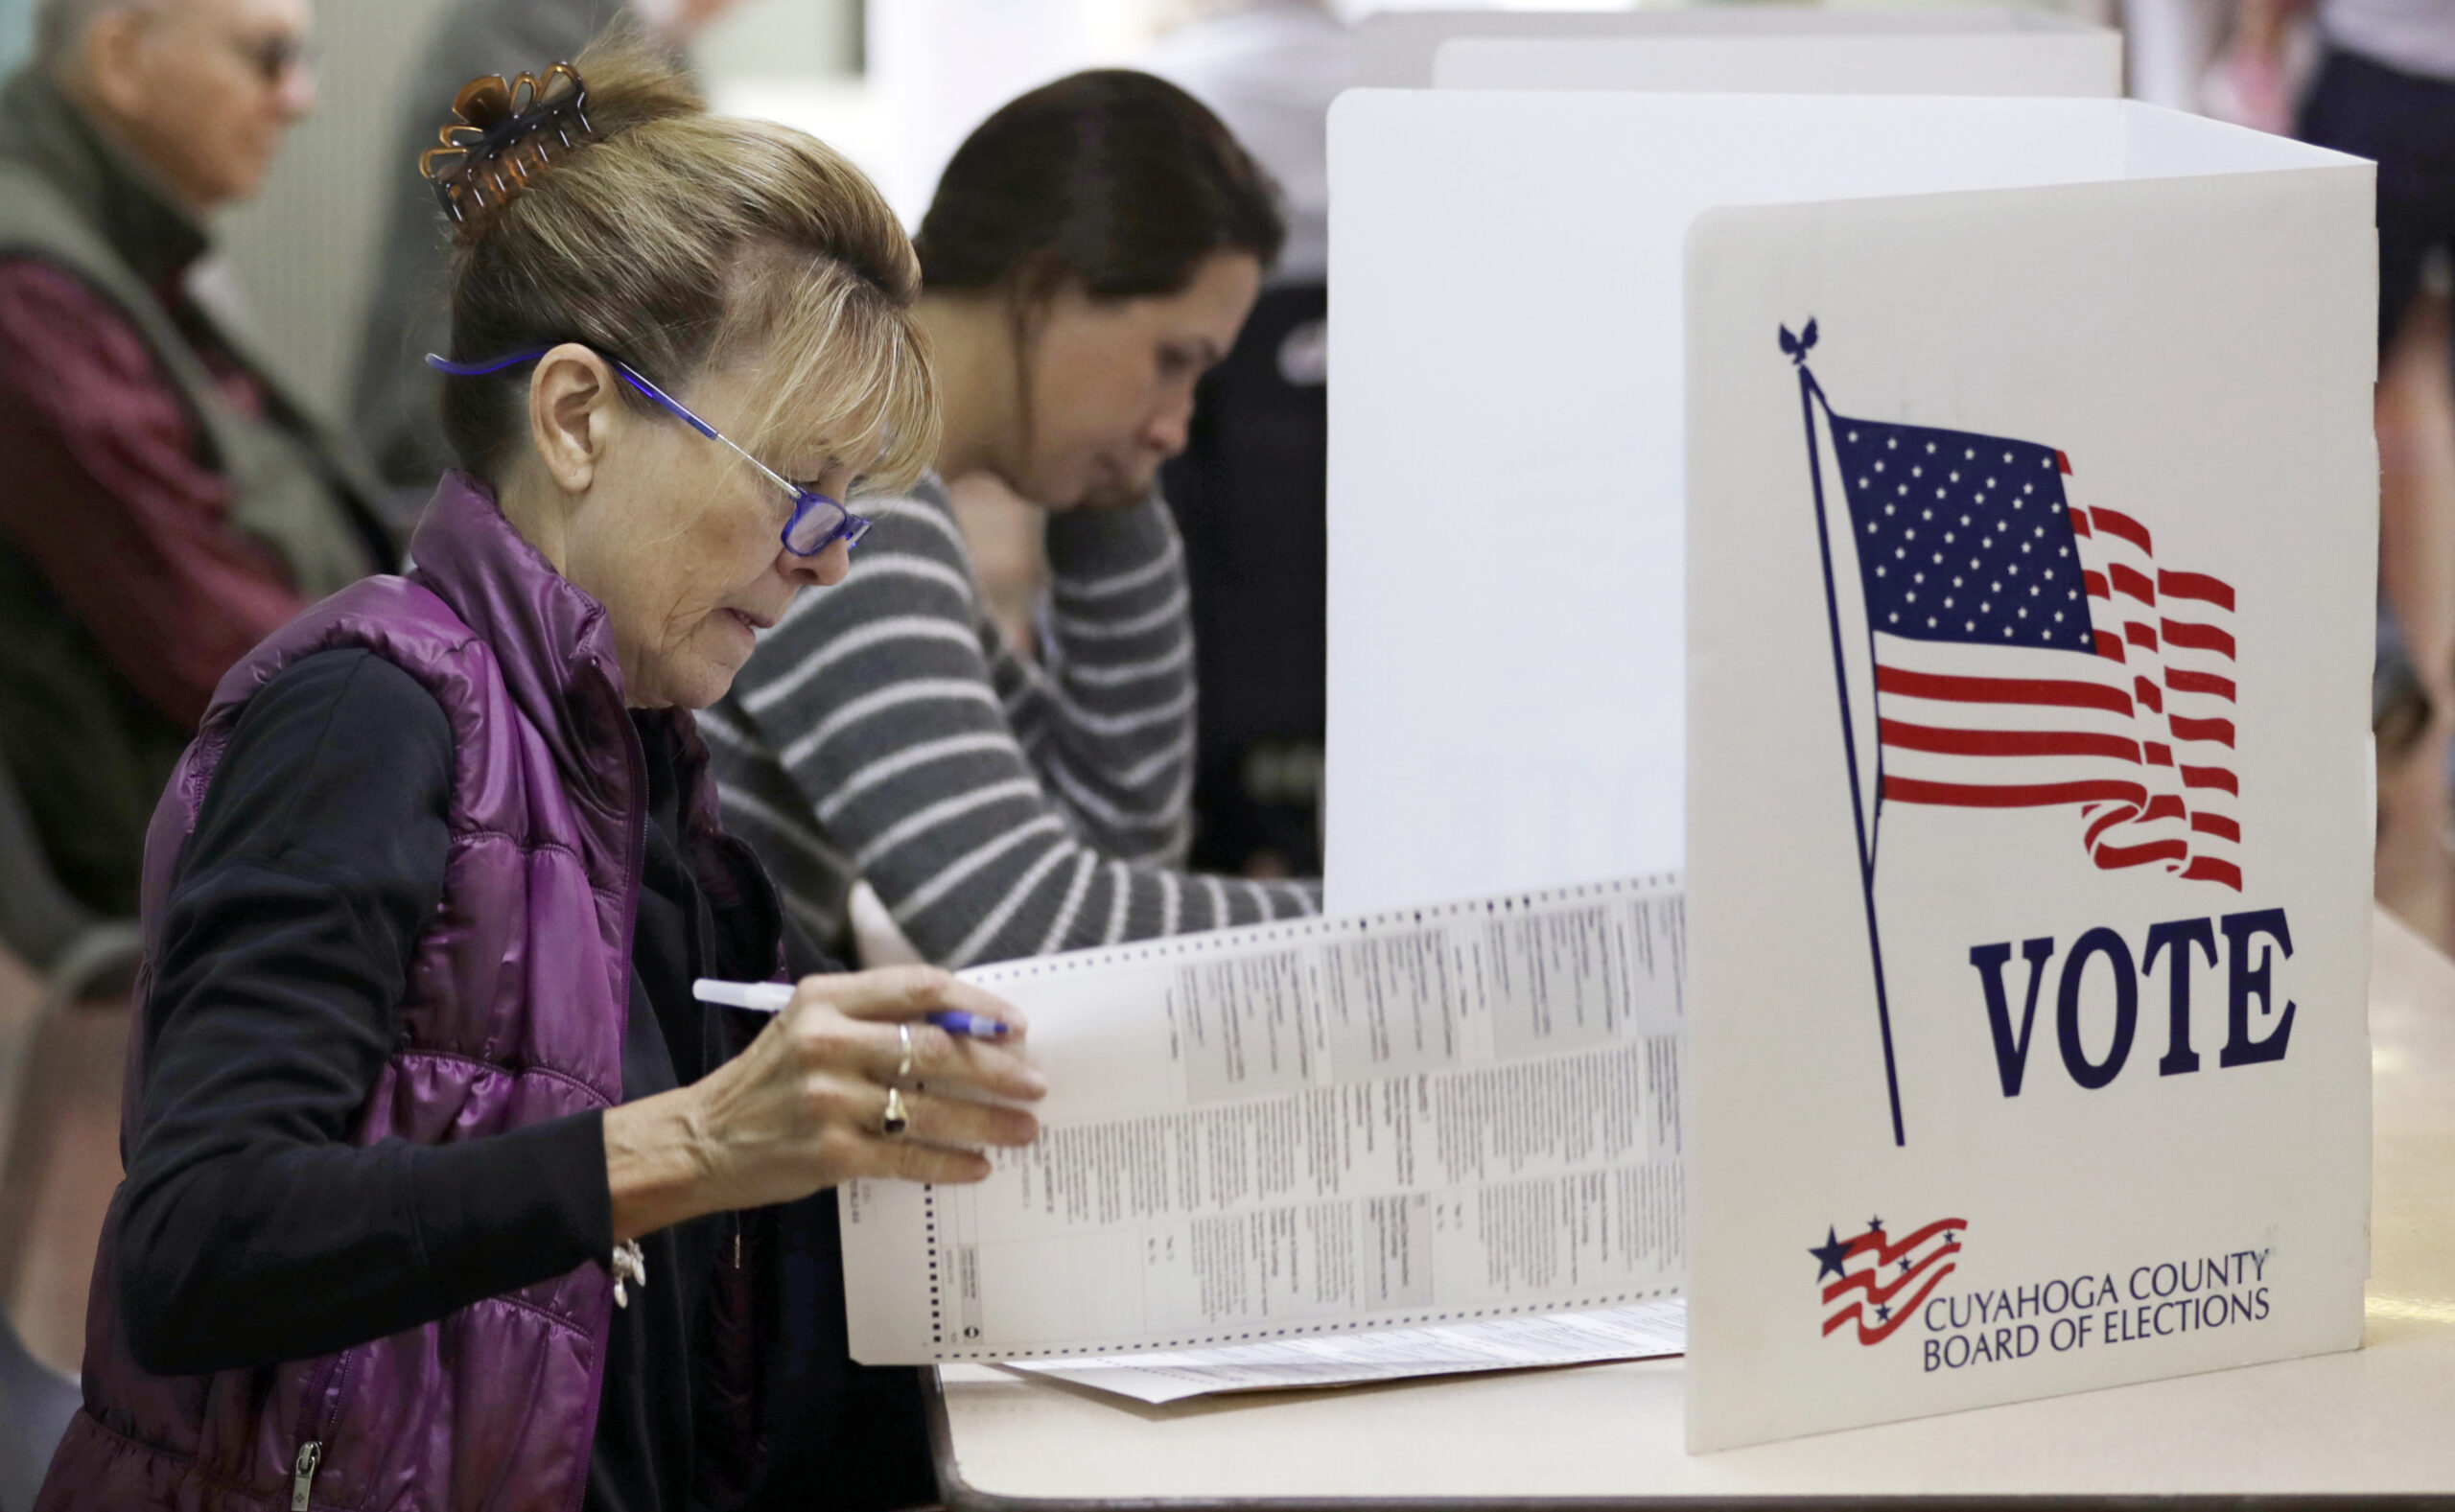 A woman looks over her voting ballot